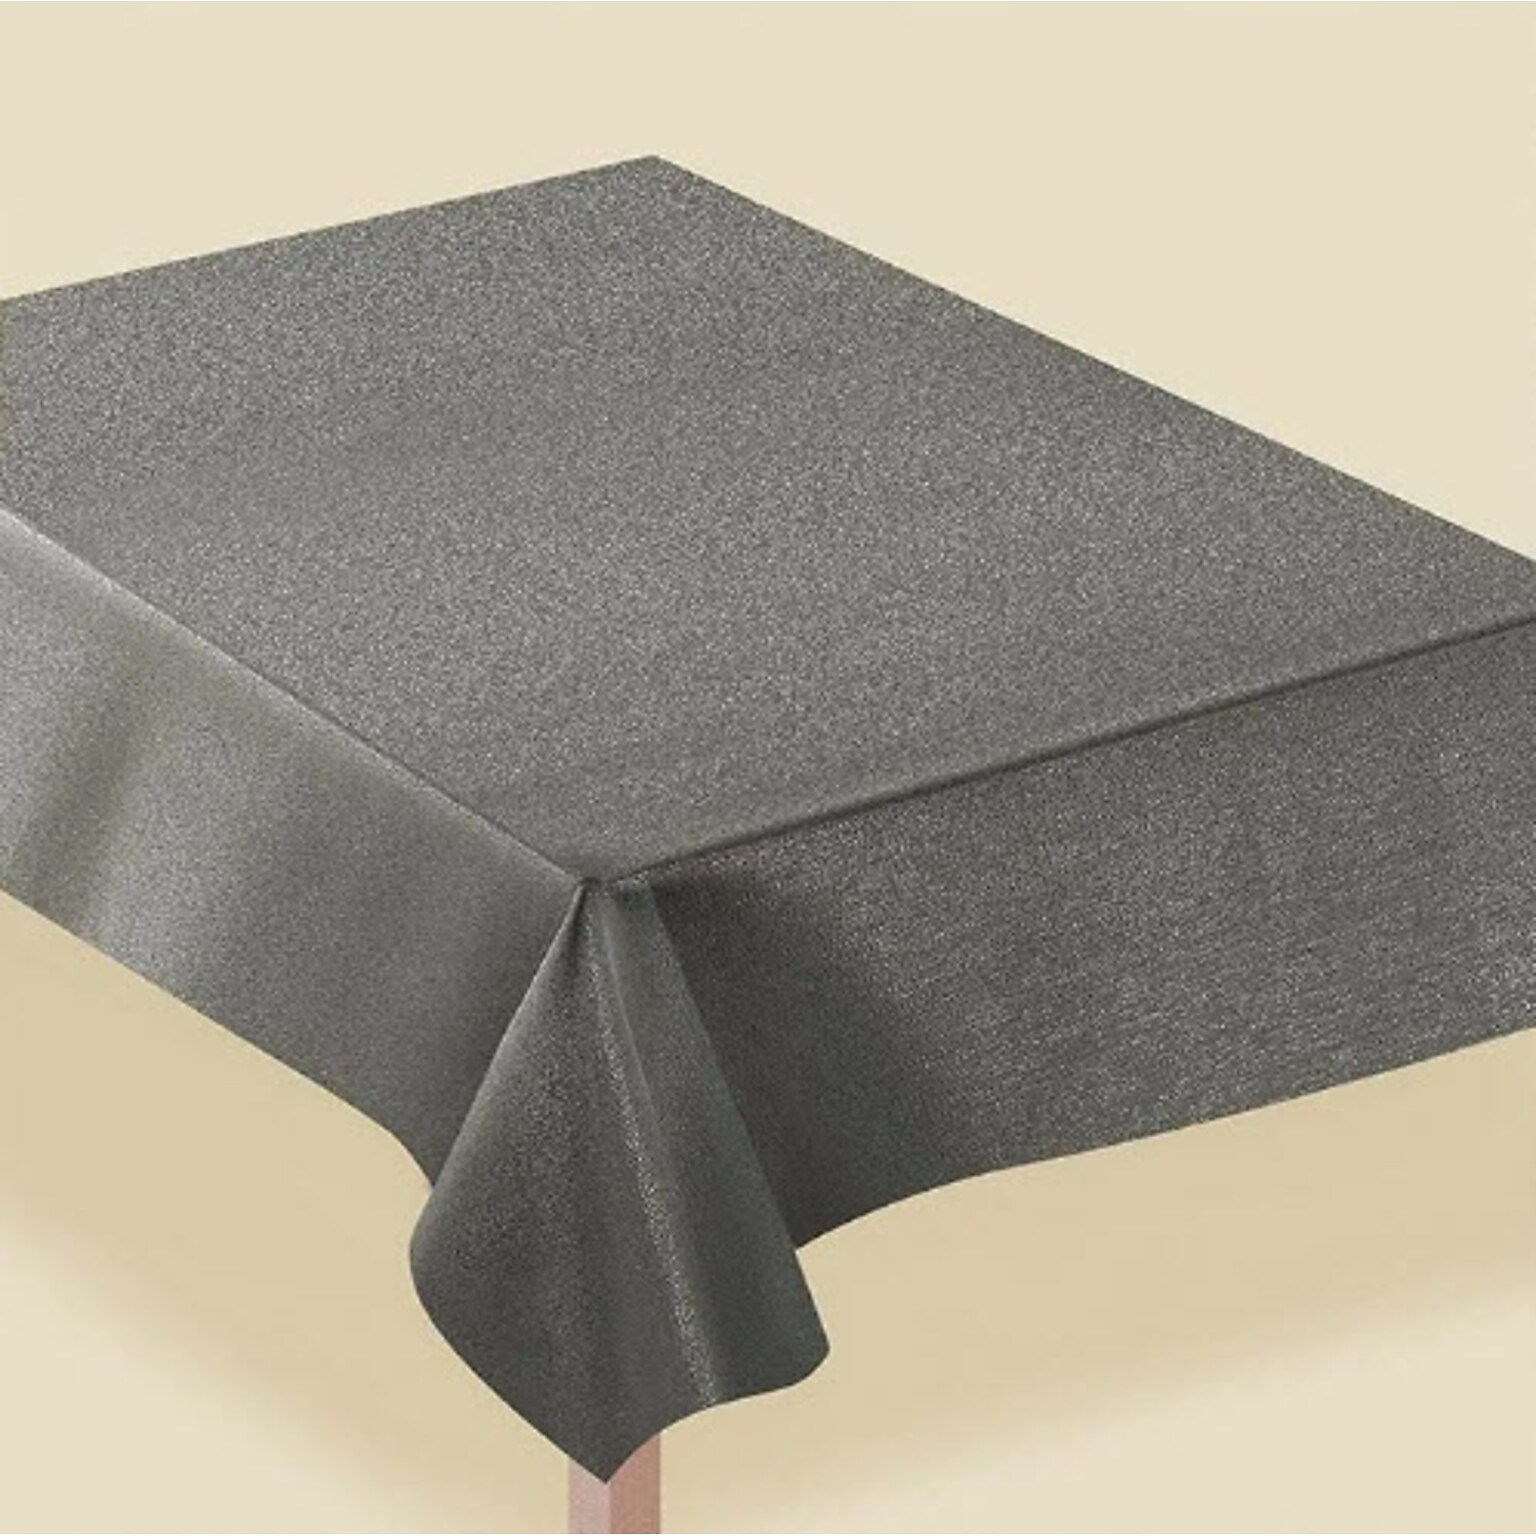 JAM PAPER Premium Shimmer Fabric Tablecloth, Rectangle 60 x 84 inch, Metallic Pewter Grey, 1 Reusable Table Cover/Pack